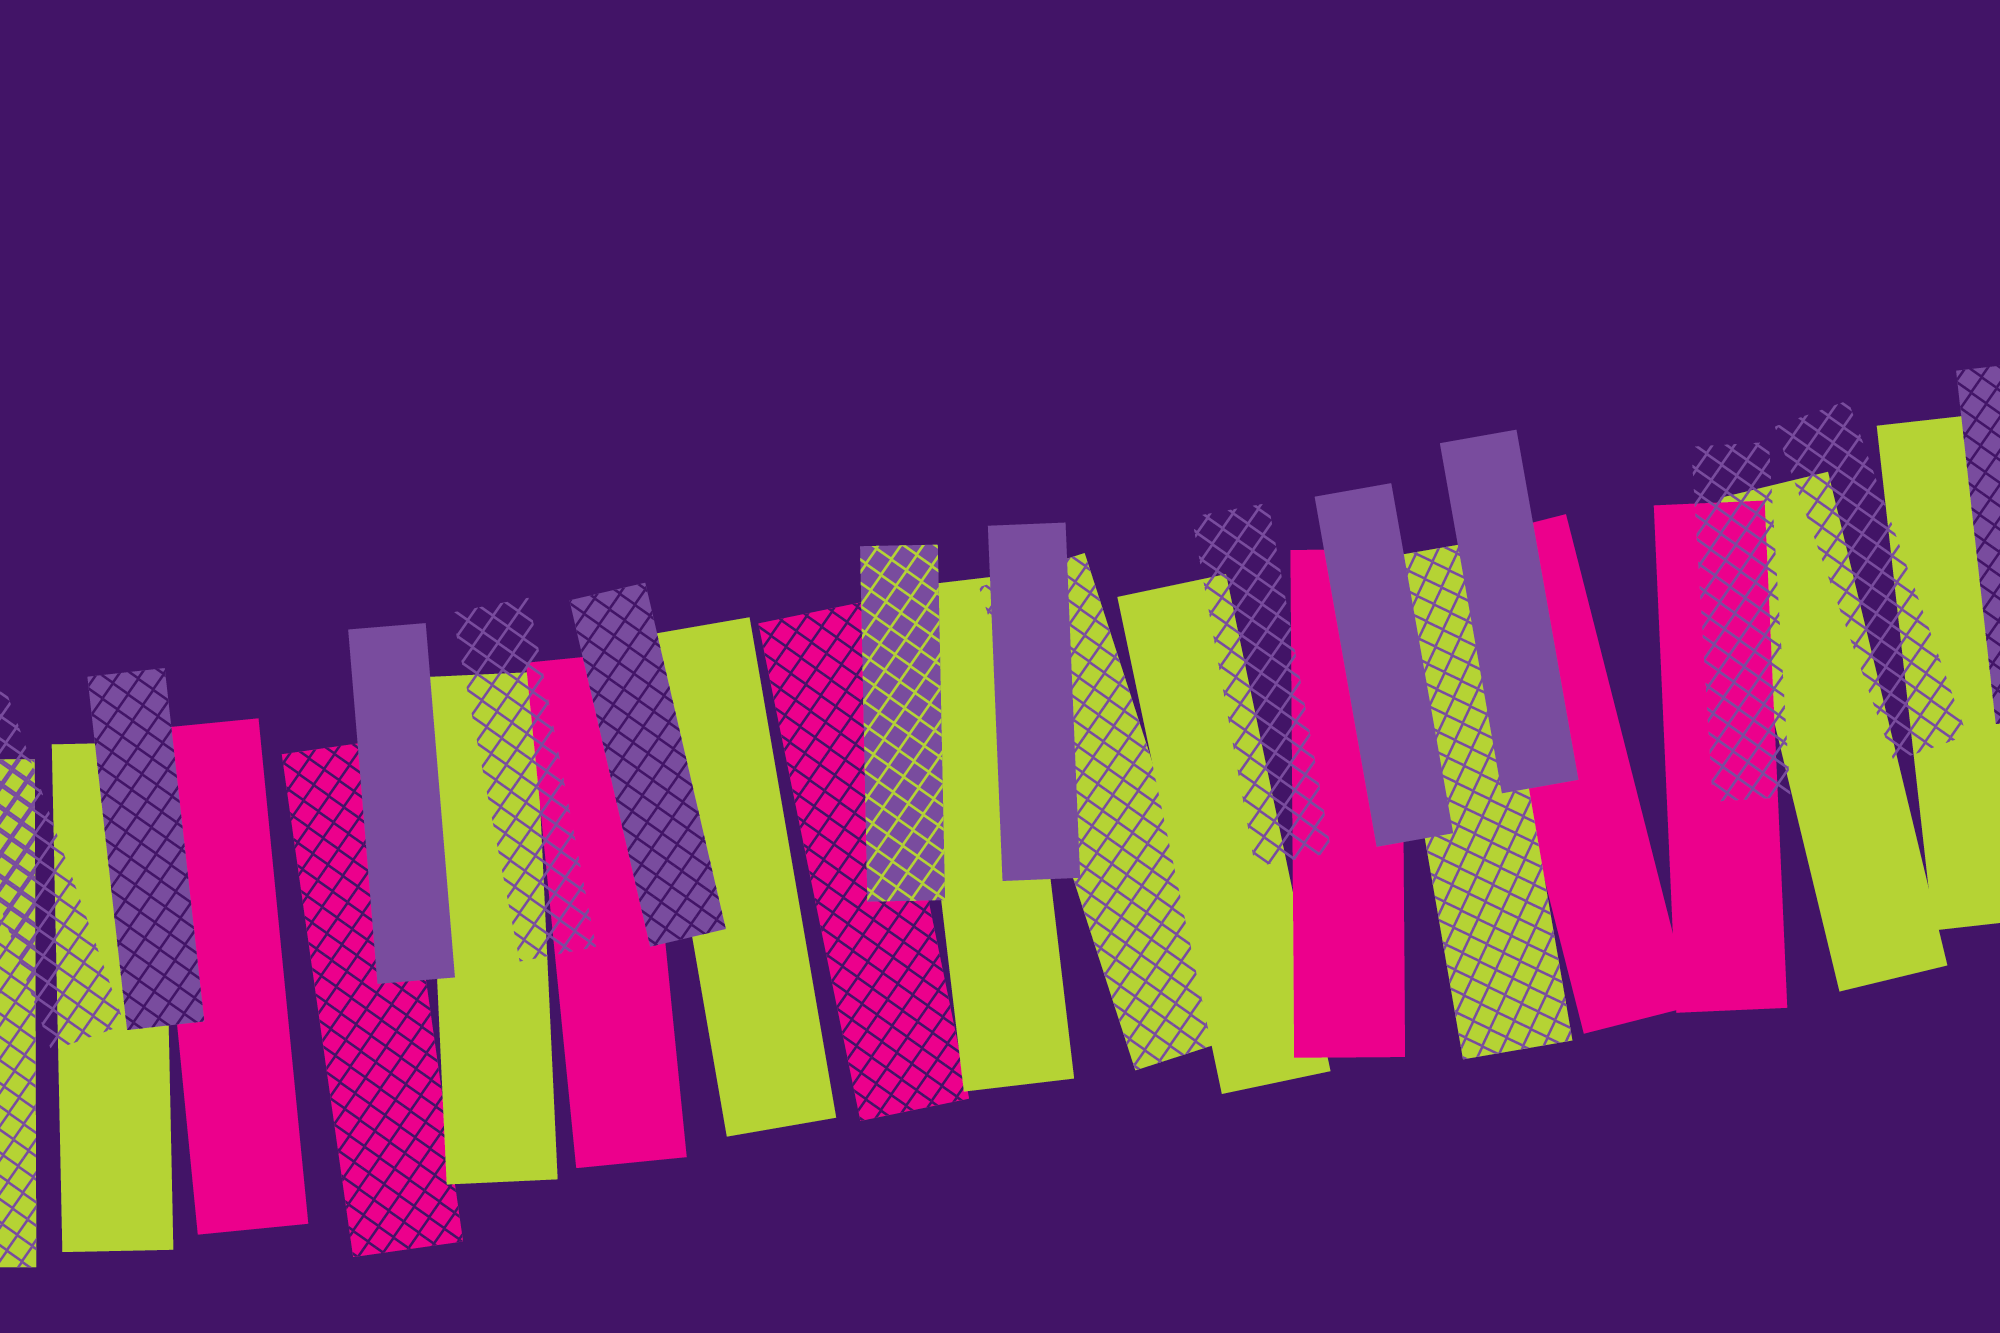 Abstract image of hot pink and lime green piano keys against a purple background.